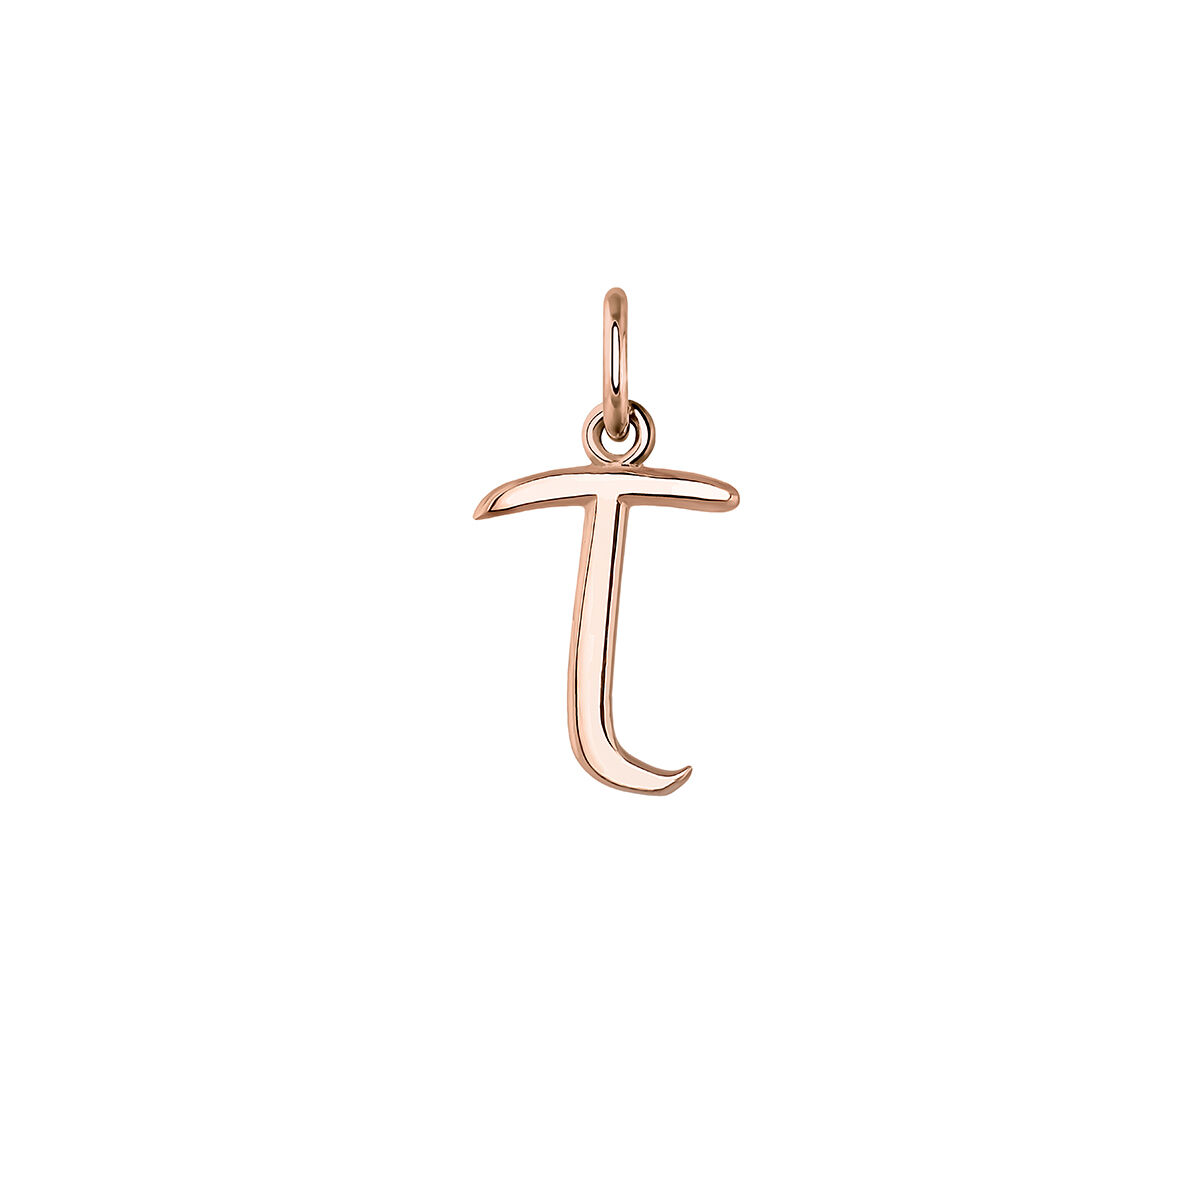 Rose gold-plated silver T initial charm  , J03932-03-T, hi-res